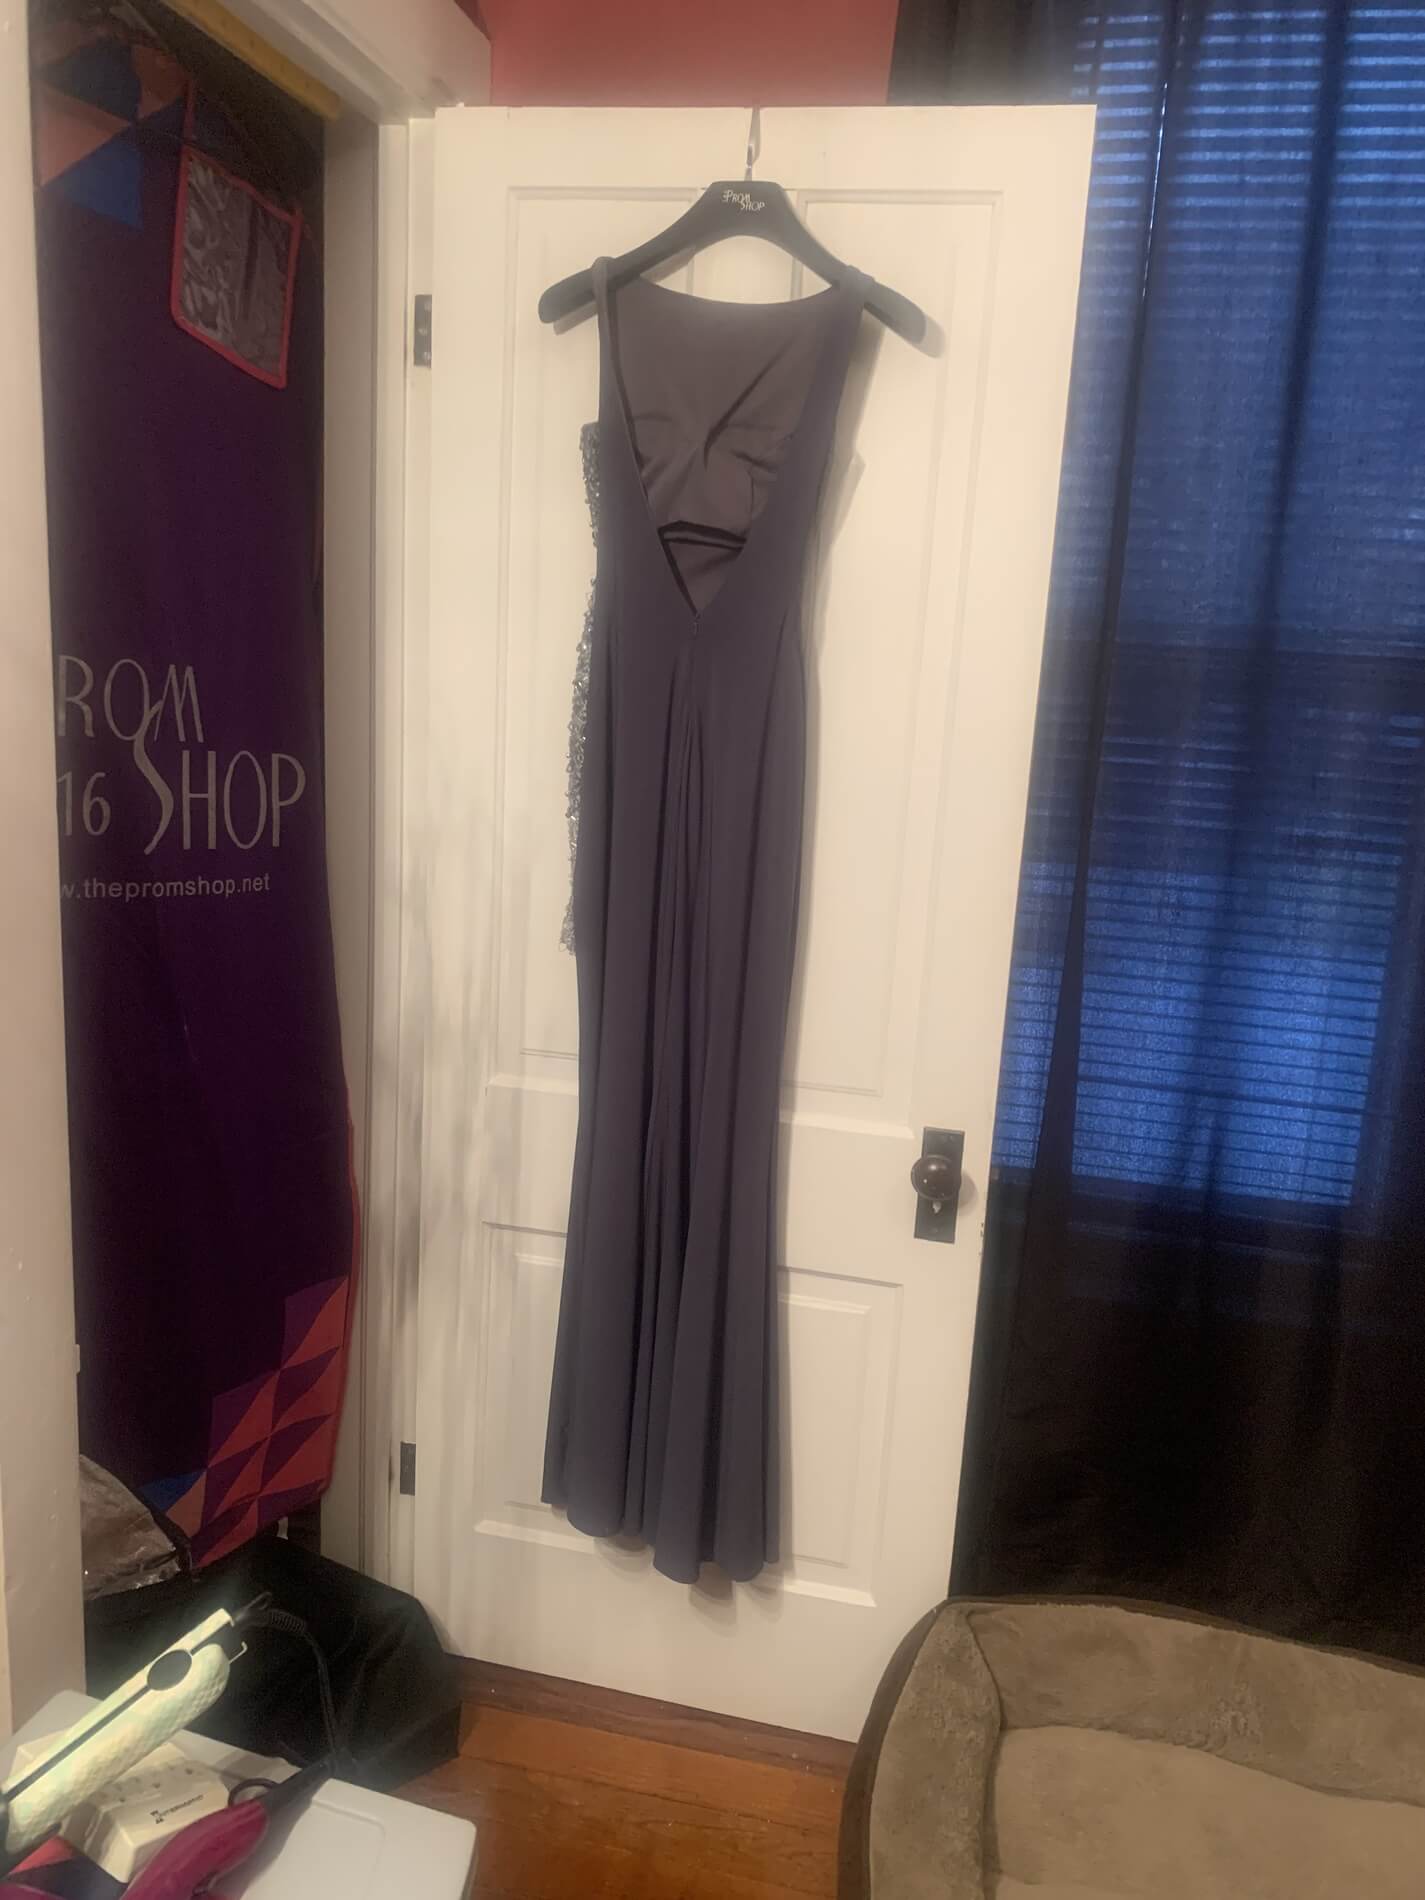 Silver Size 0 A-line Dress on Queenly